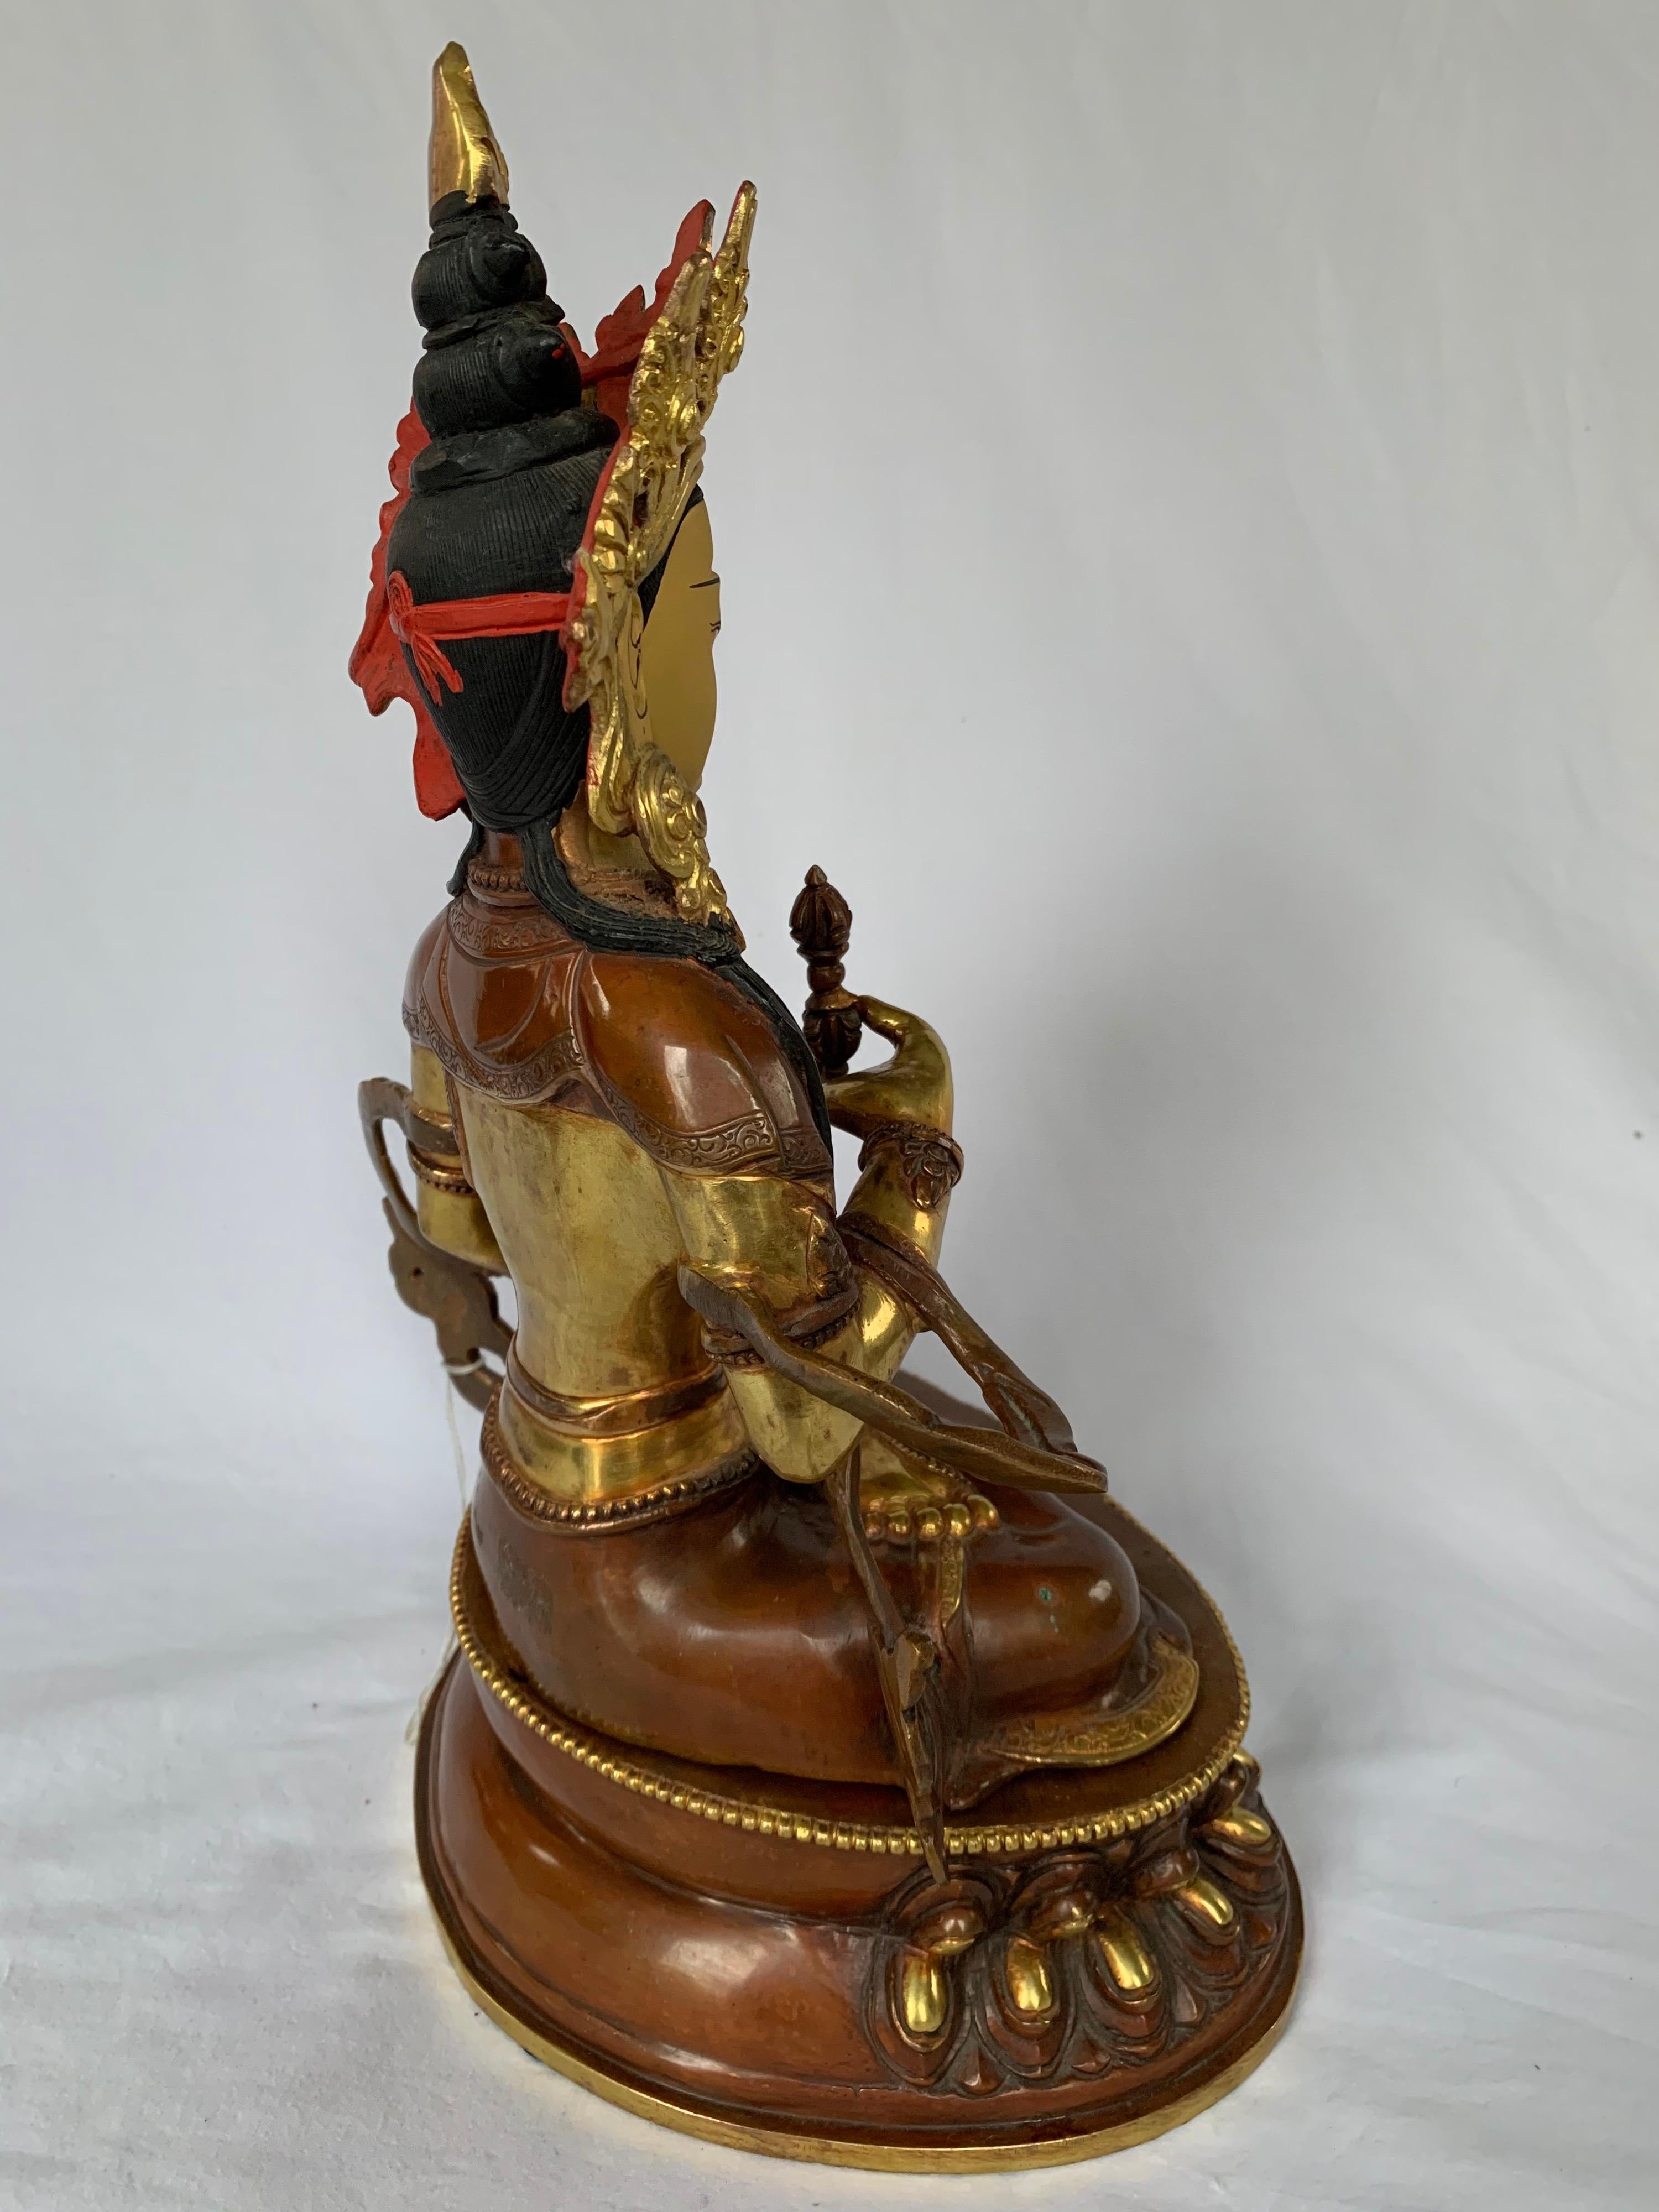 Vajrasattva Statue 12.5 Inch with 24K Gold Handcrafted by Lost Wax Process - Other Art Style Sculpture by Unknown